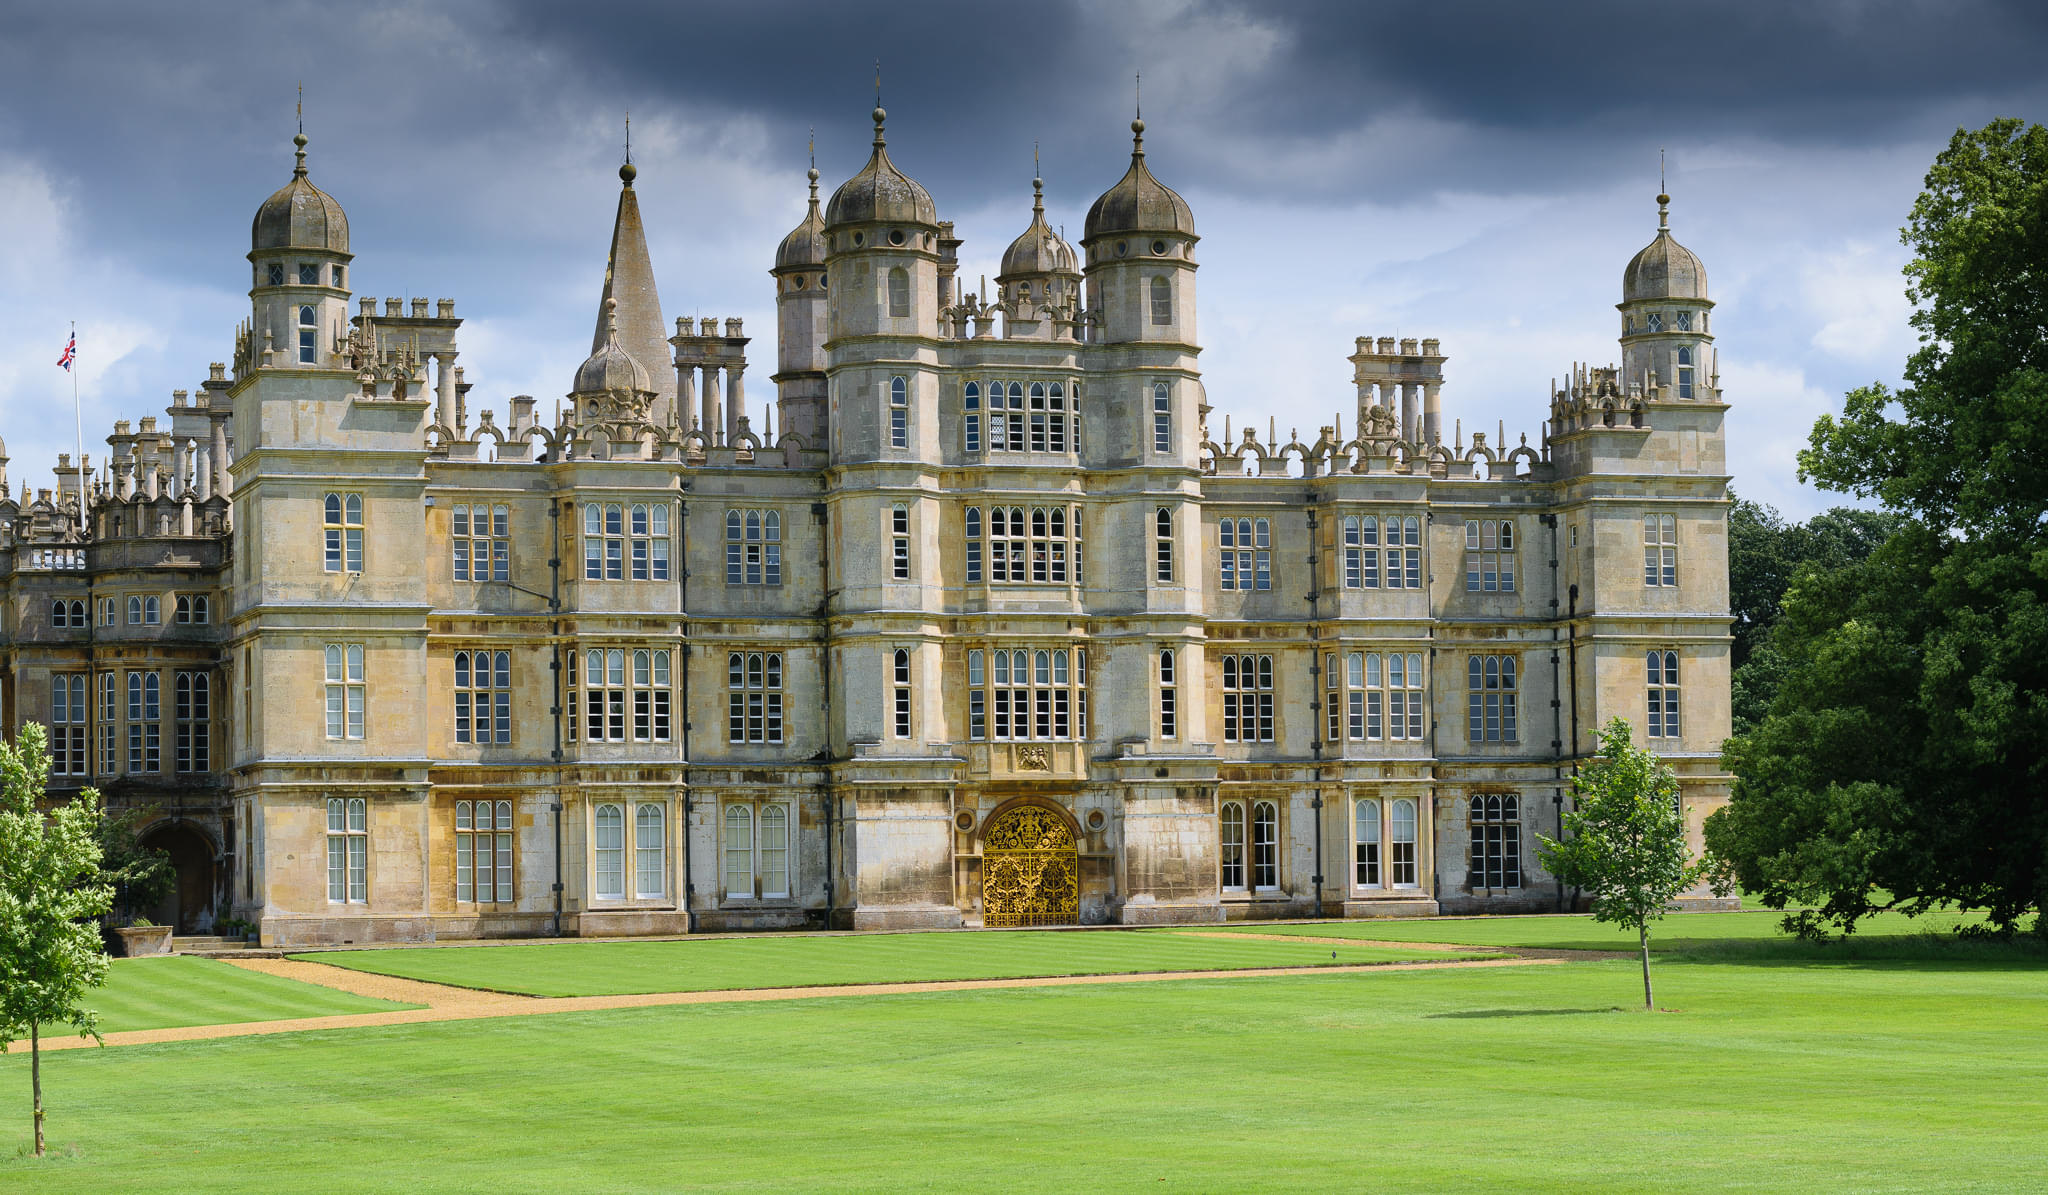 Burghley House Overview